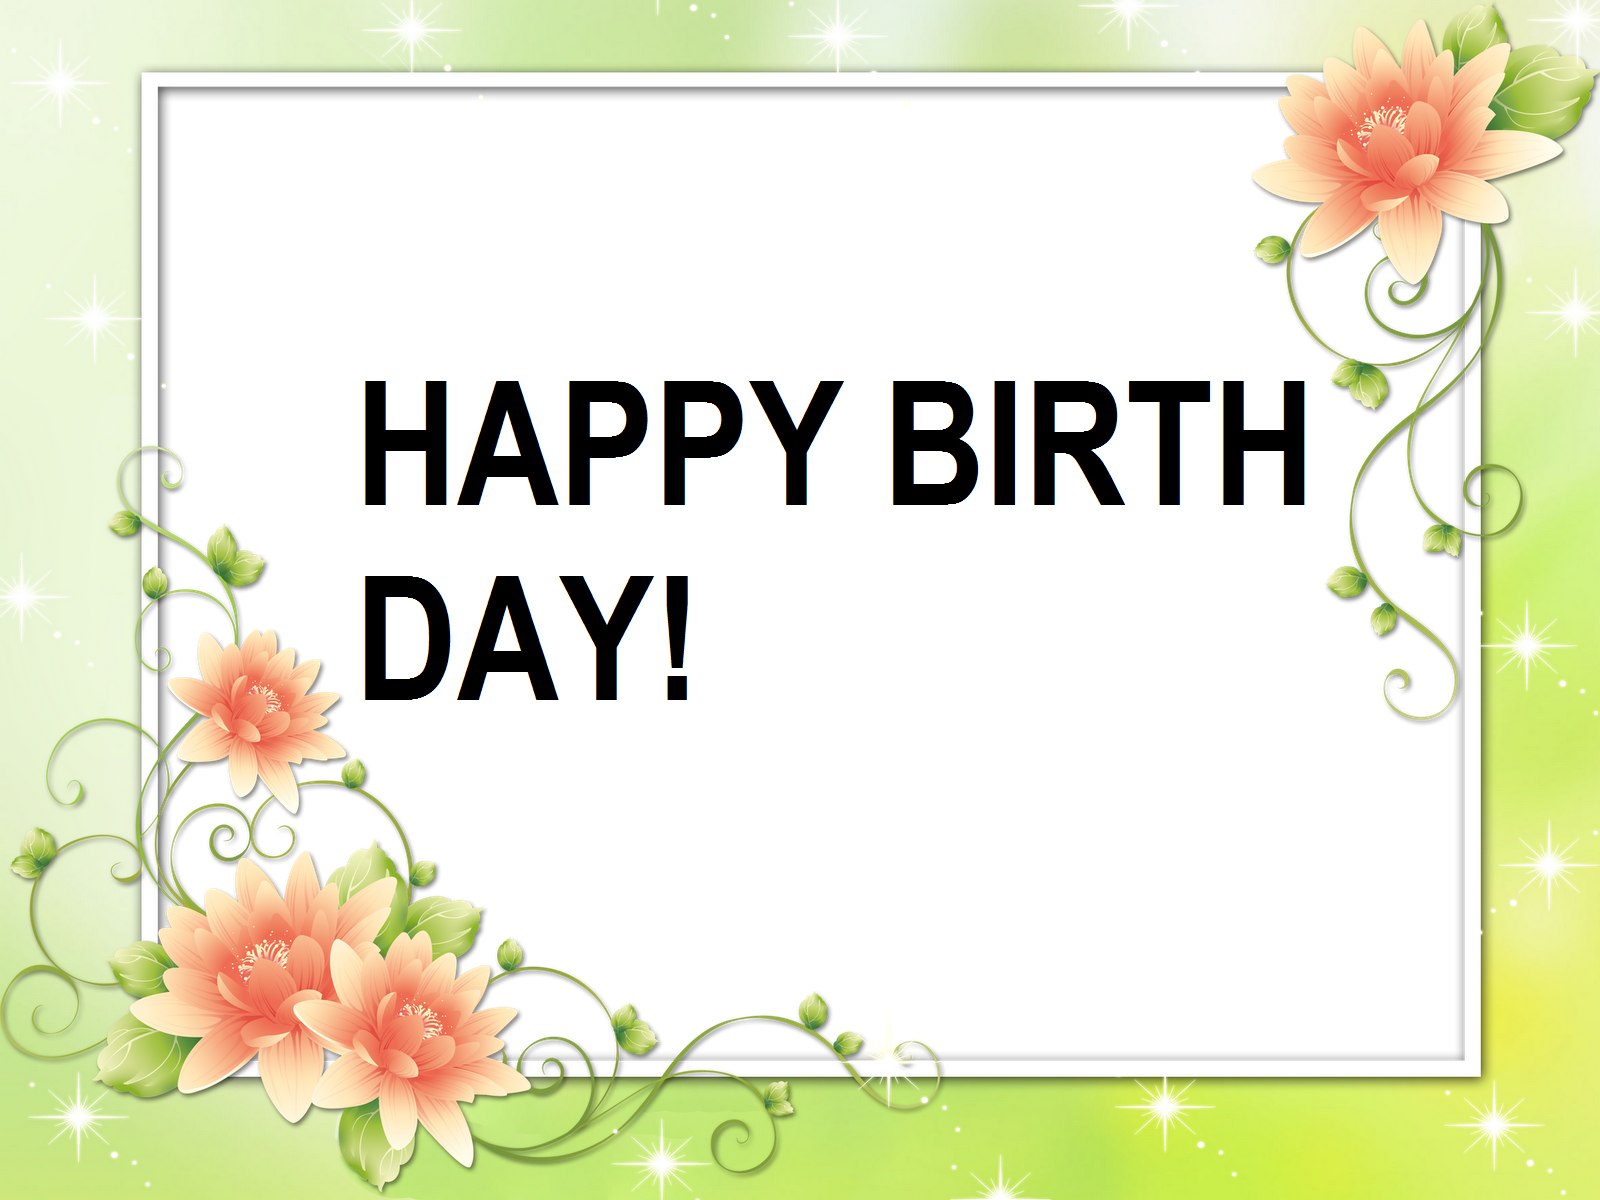 HappyBirthday-images-Photos-Download